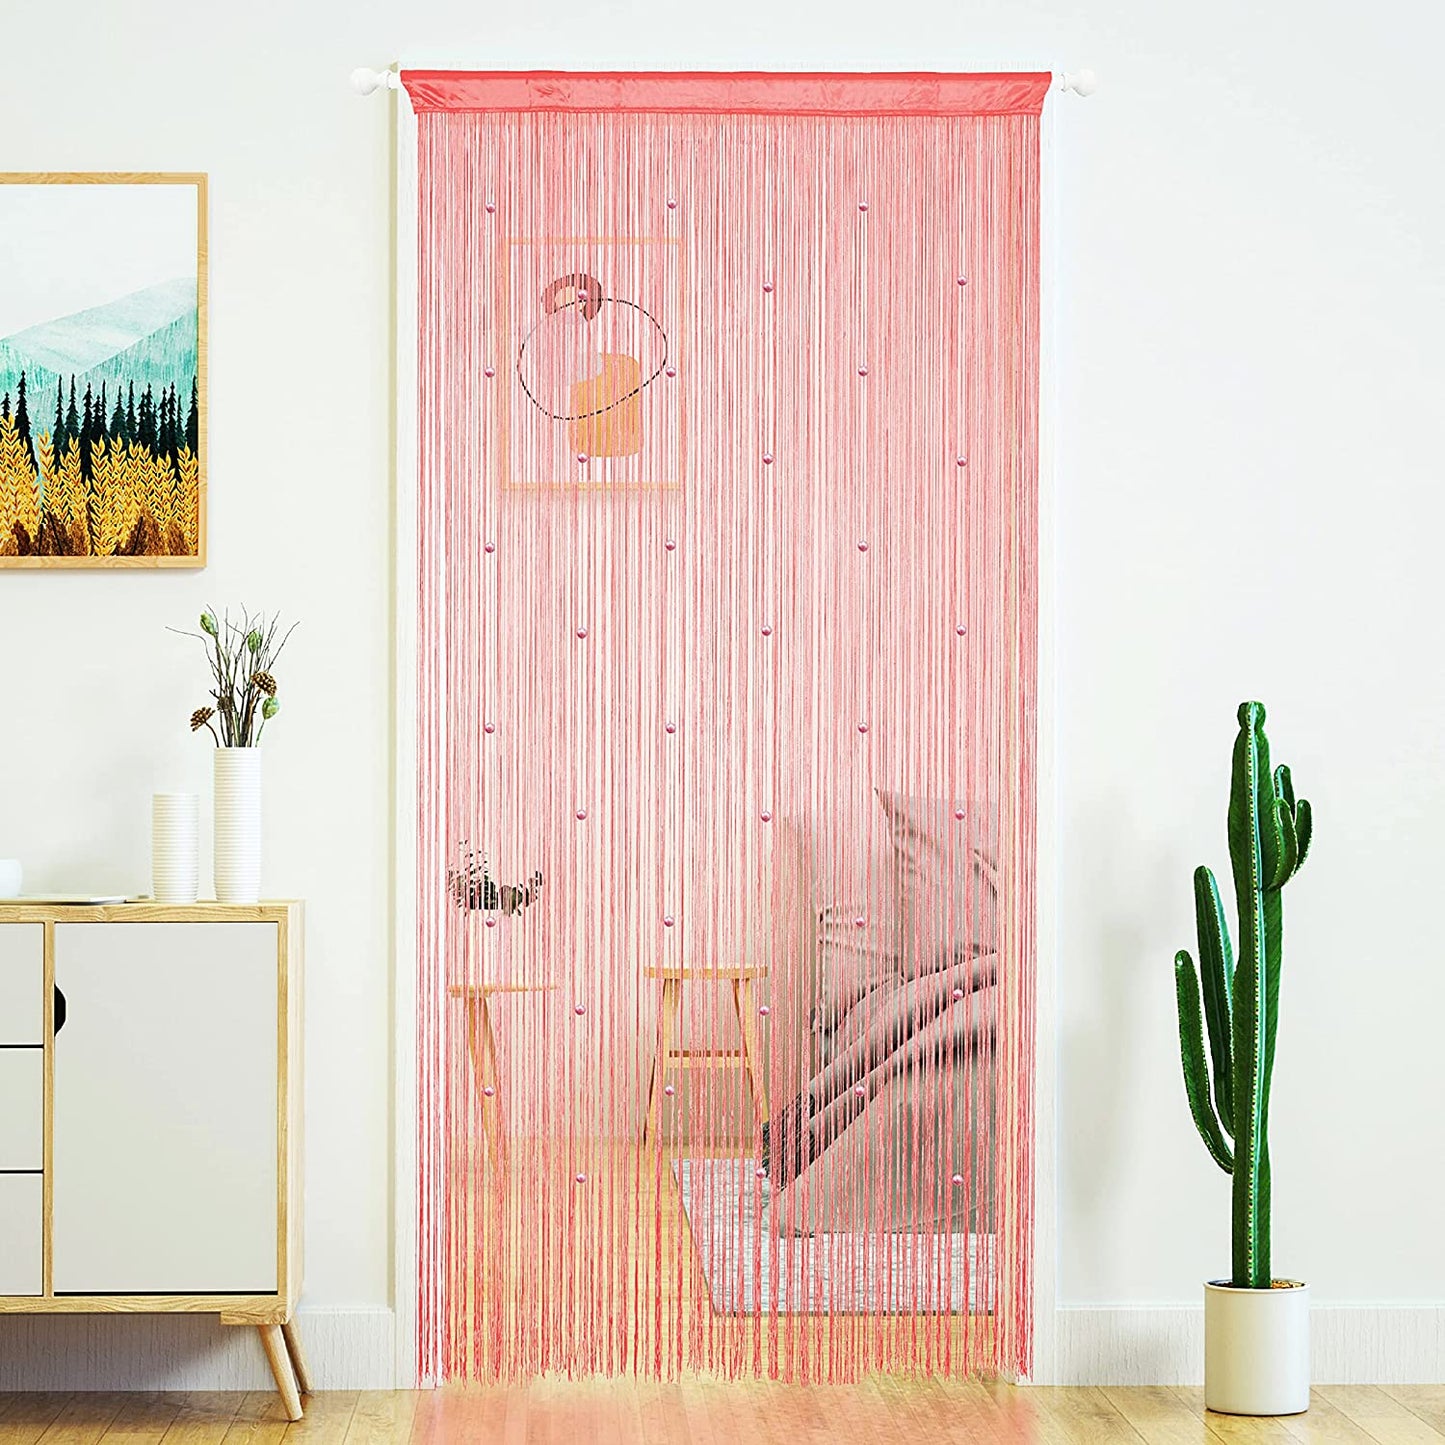 Yaoyue Beaded Curtain Door String Curtains for Doorway Tassels Beads Hanging Fringe Hippie Room Divider Window Hallway Entrance Wall Closet Bedroom Privacy Decor (39×79In/100×200Cm, Light Coffee)  YaoYue Pink 100×200Cm 